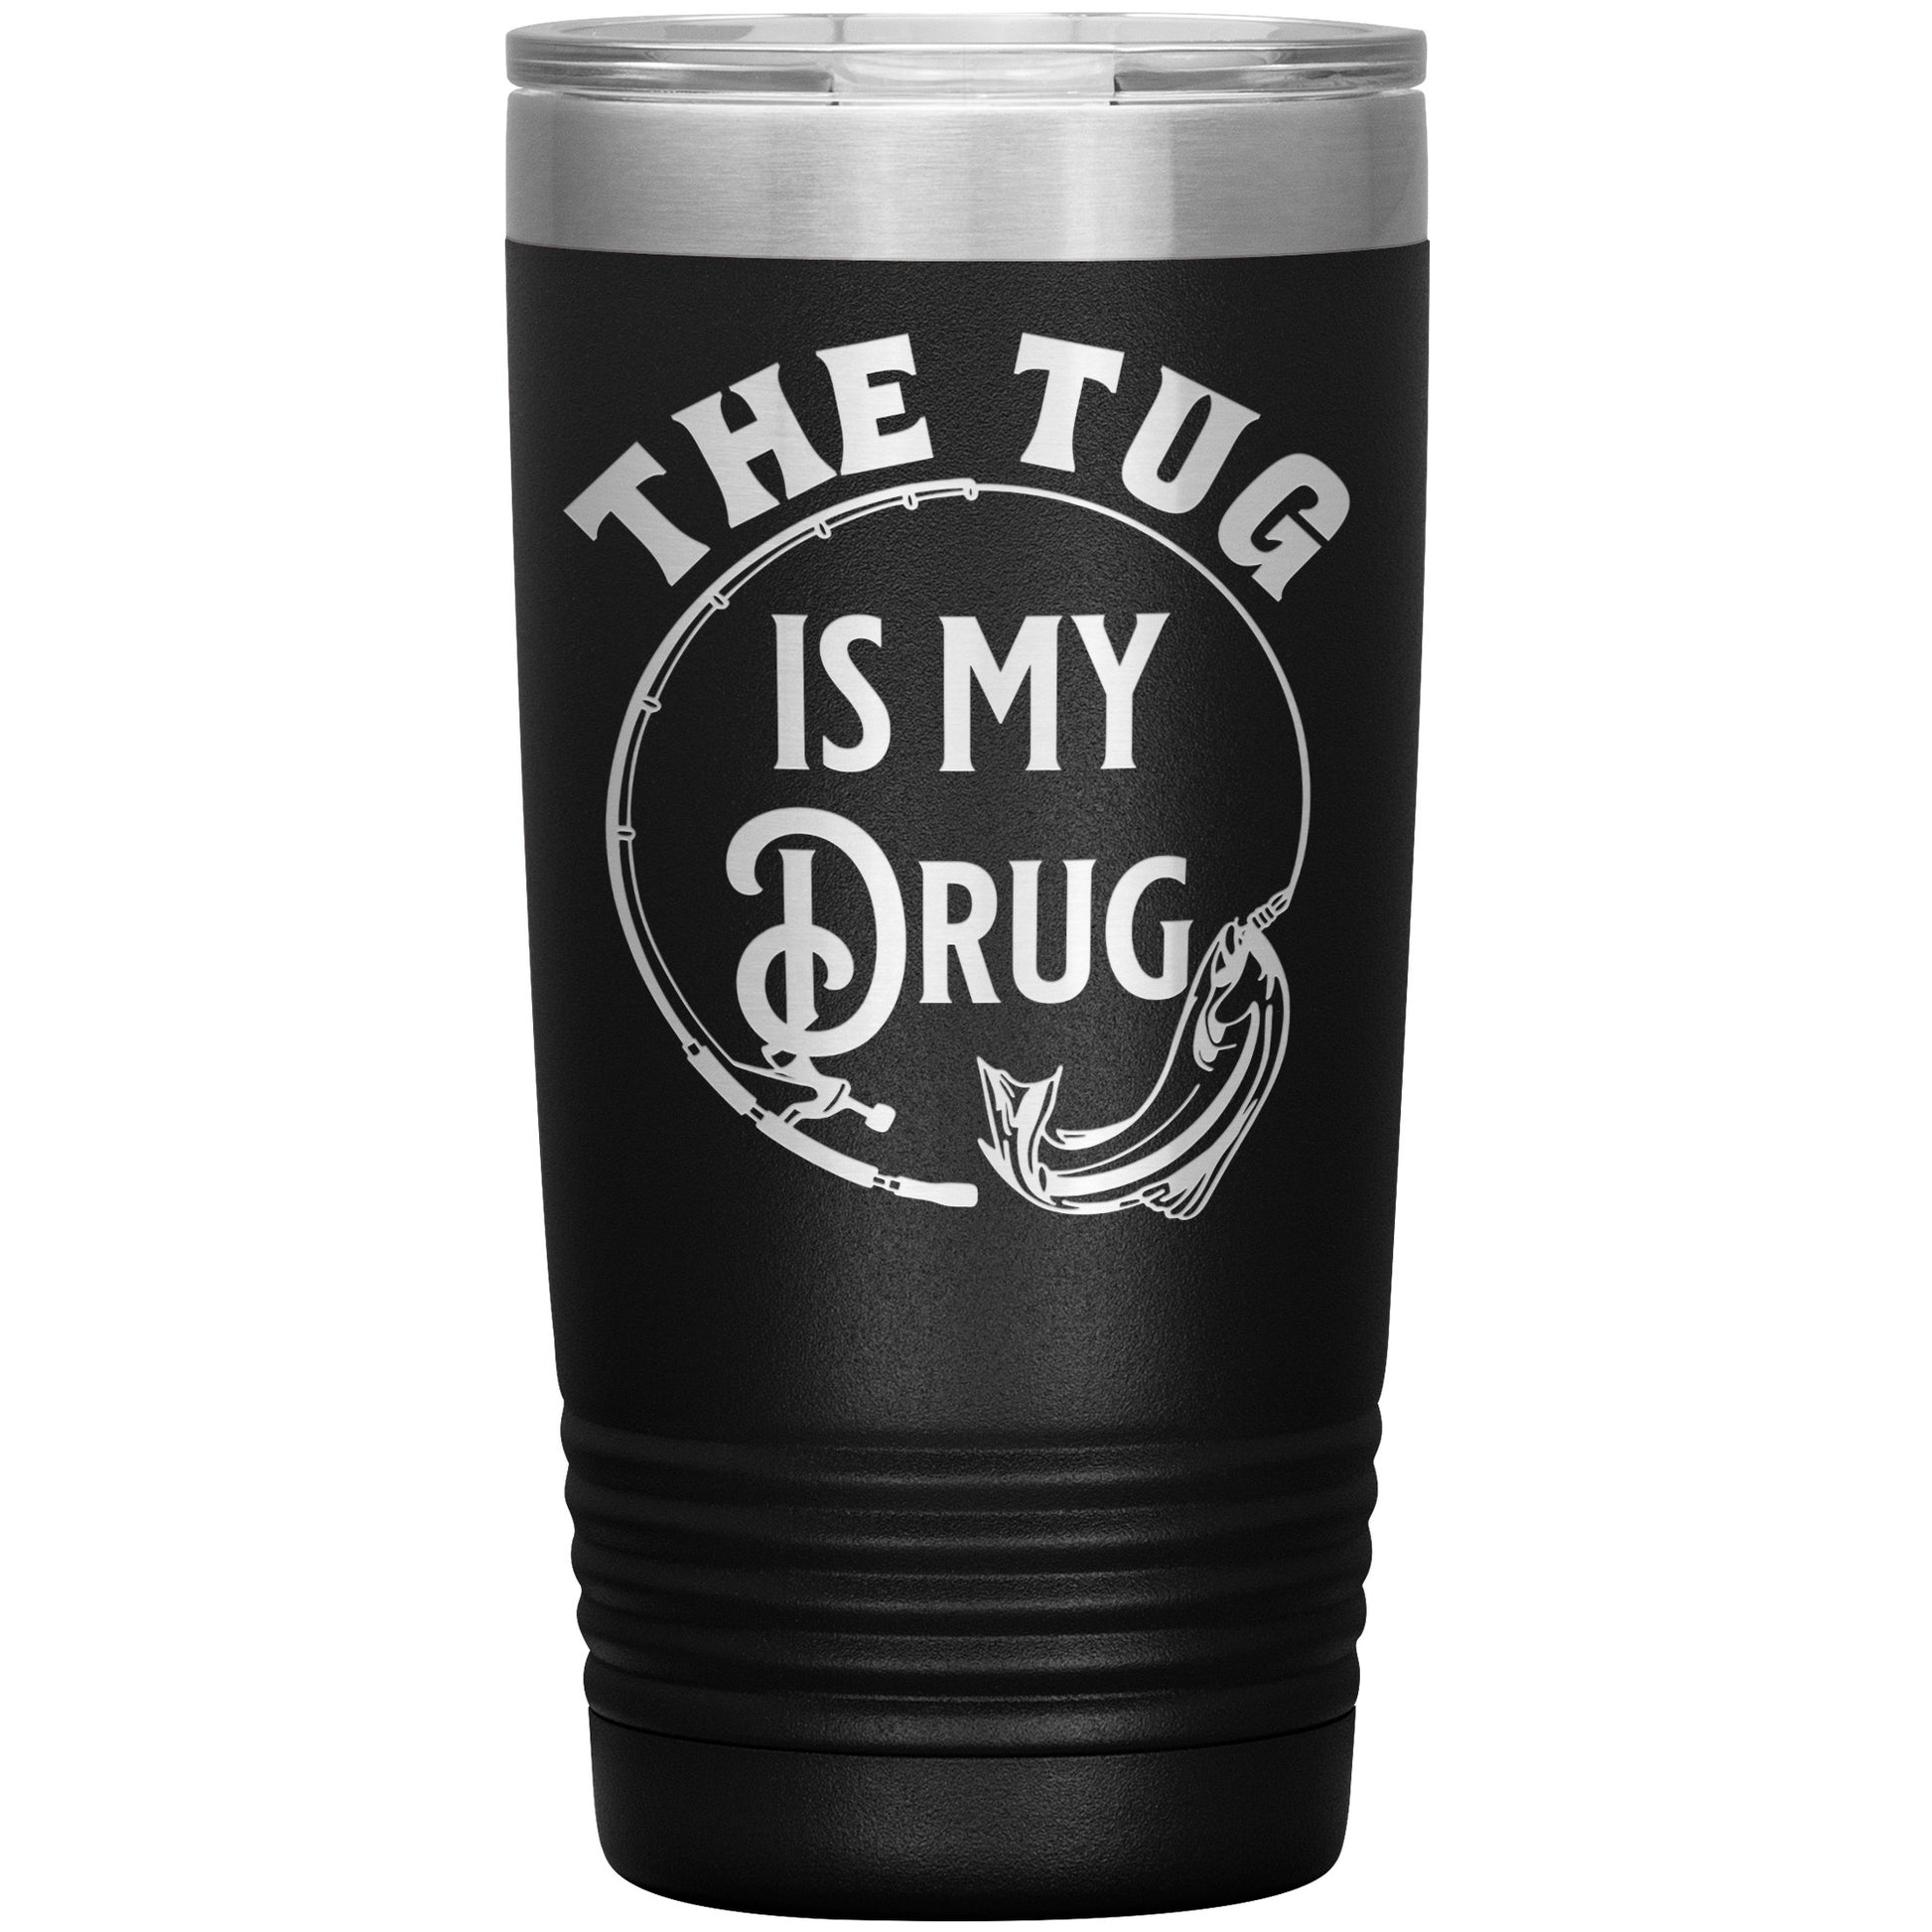 A blue double-wall stainless steel tumbler with the The Tug is my Drug - Laser Etched Tumbler - 20oz and an image of a fish on fishing line inside a circle.